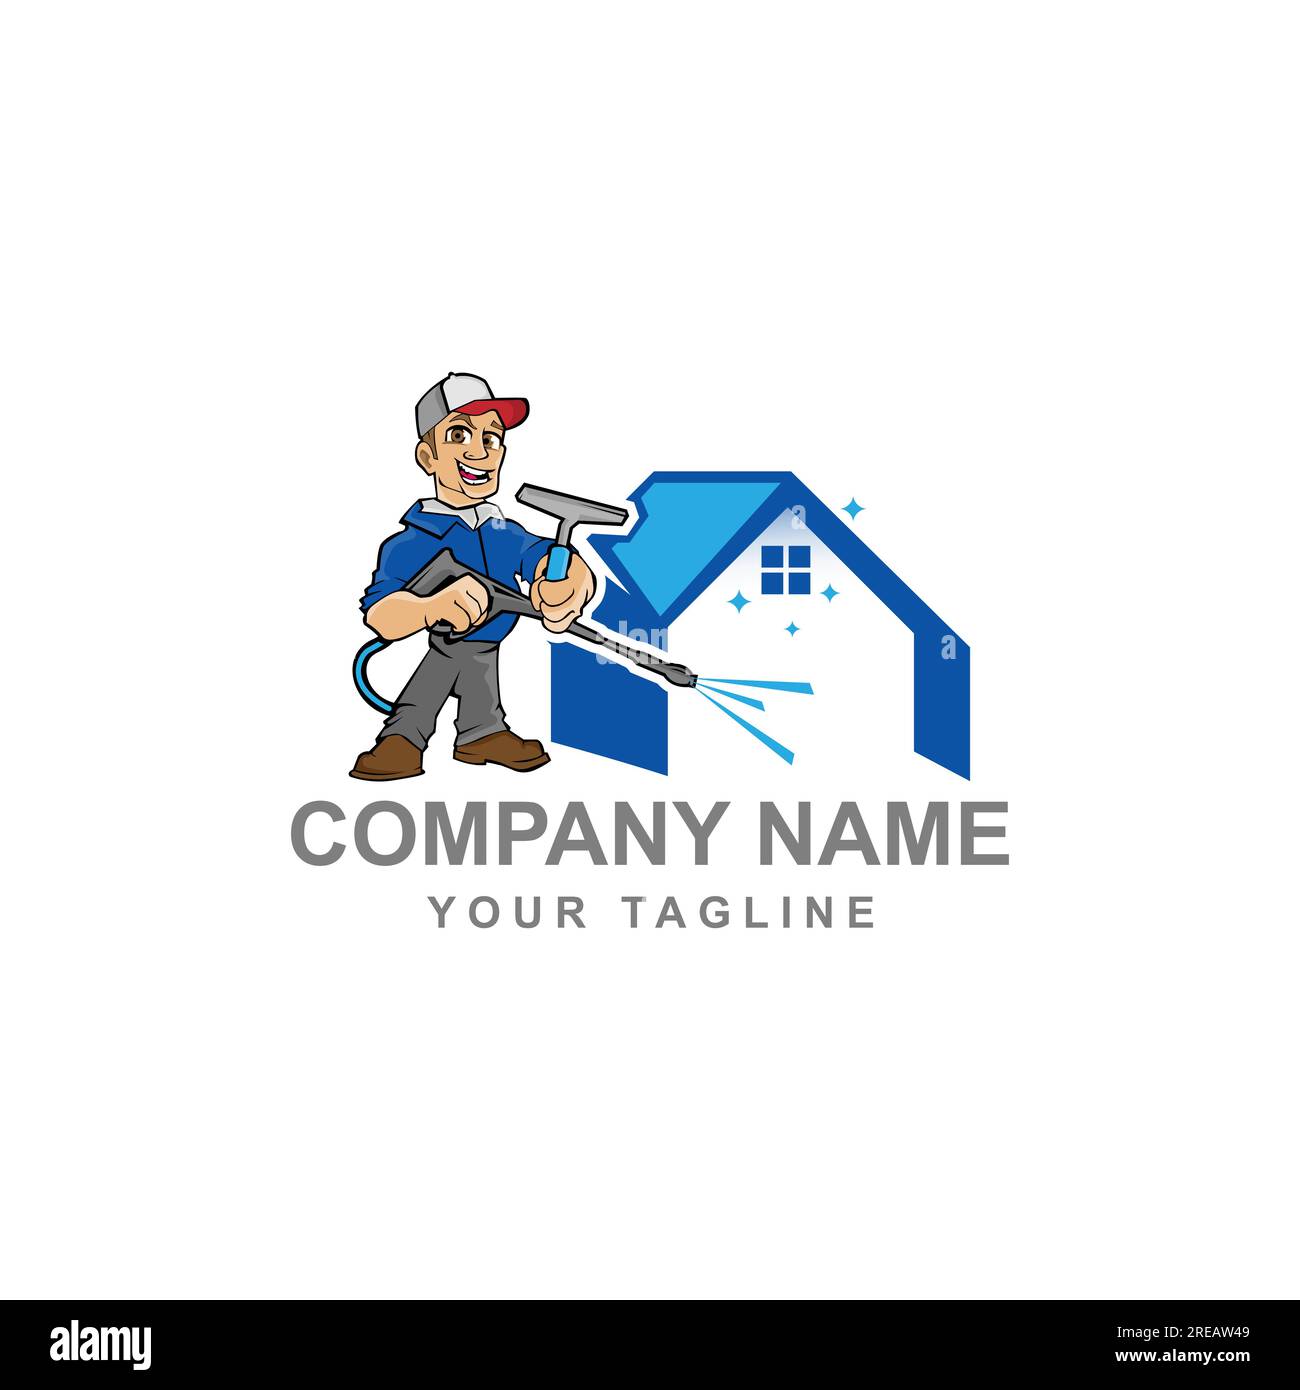 home Cleaning service character mascot in modern style, good for cleaning service business logo.EPS 10 Stock Vector